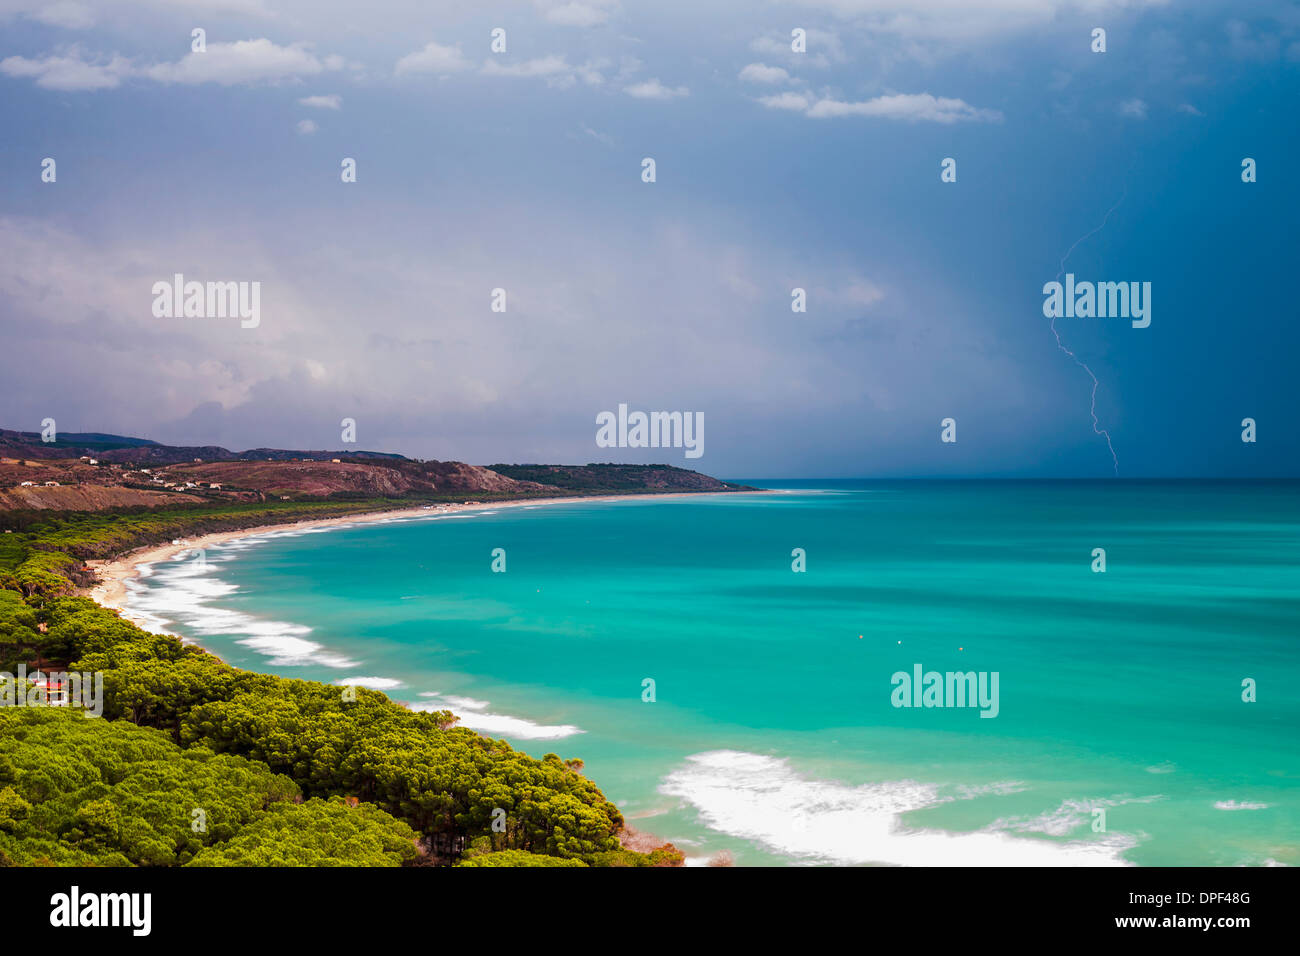 Thunder and lightning storm over Capo Bianco Beach and the Mediterranean Sea in the Province of Agrigento, Sicily, Italy, Europe Stock Photo